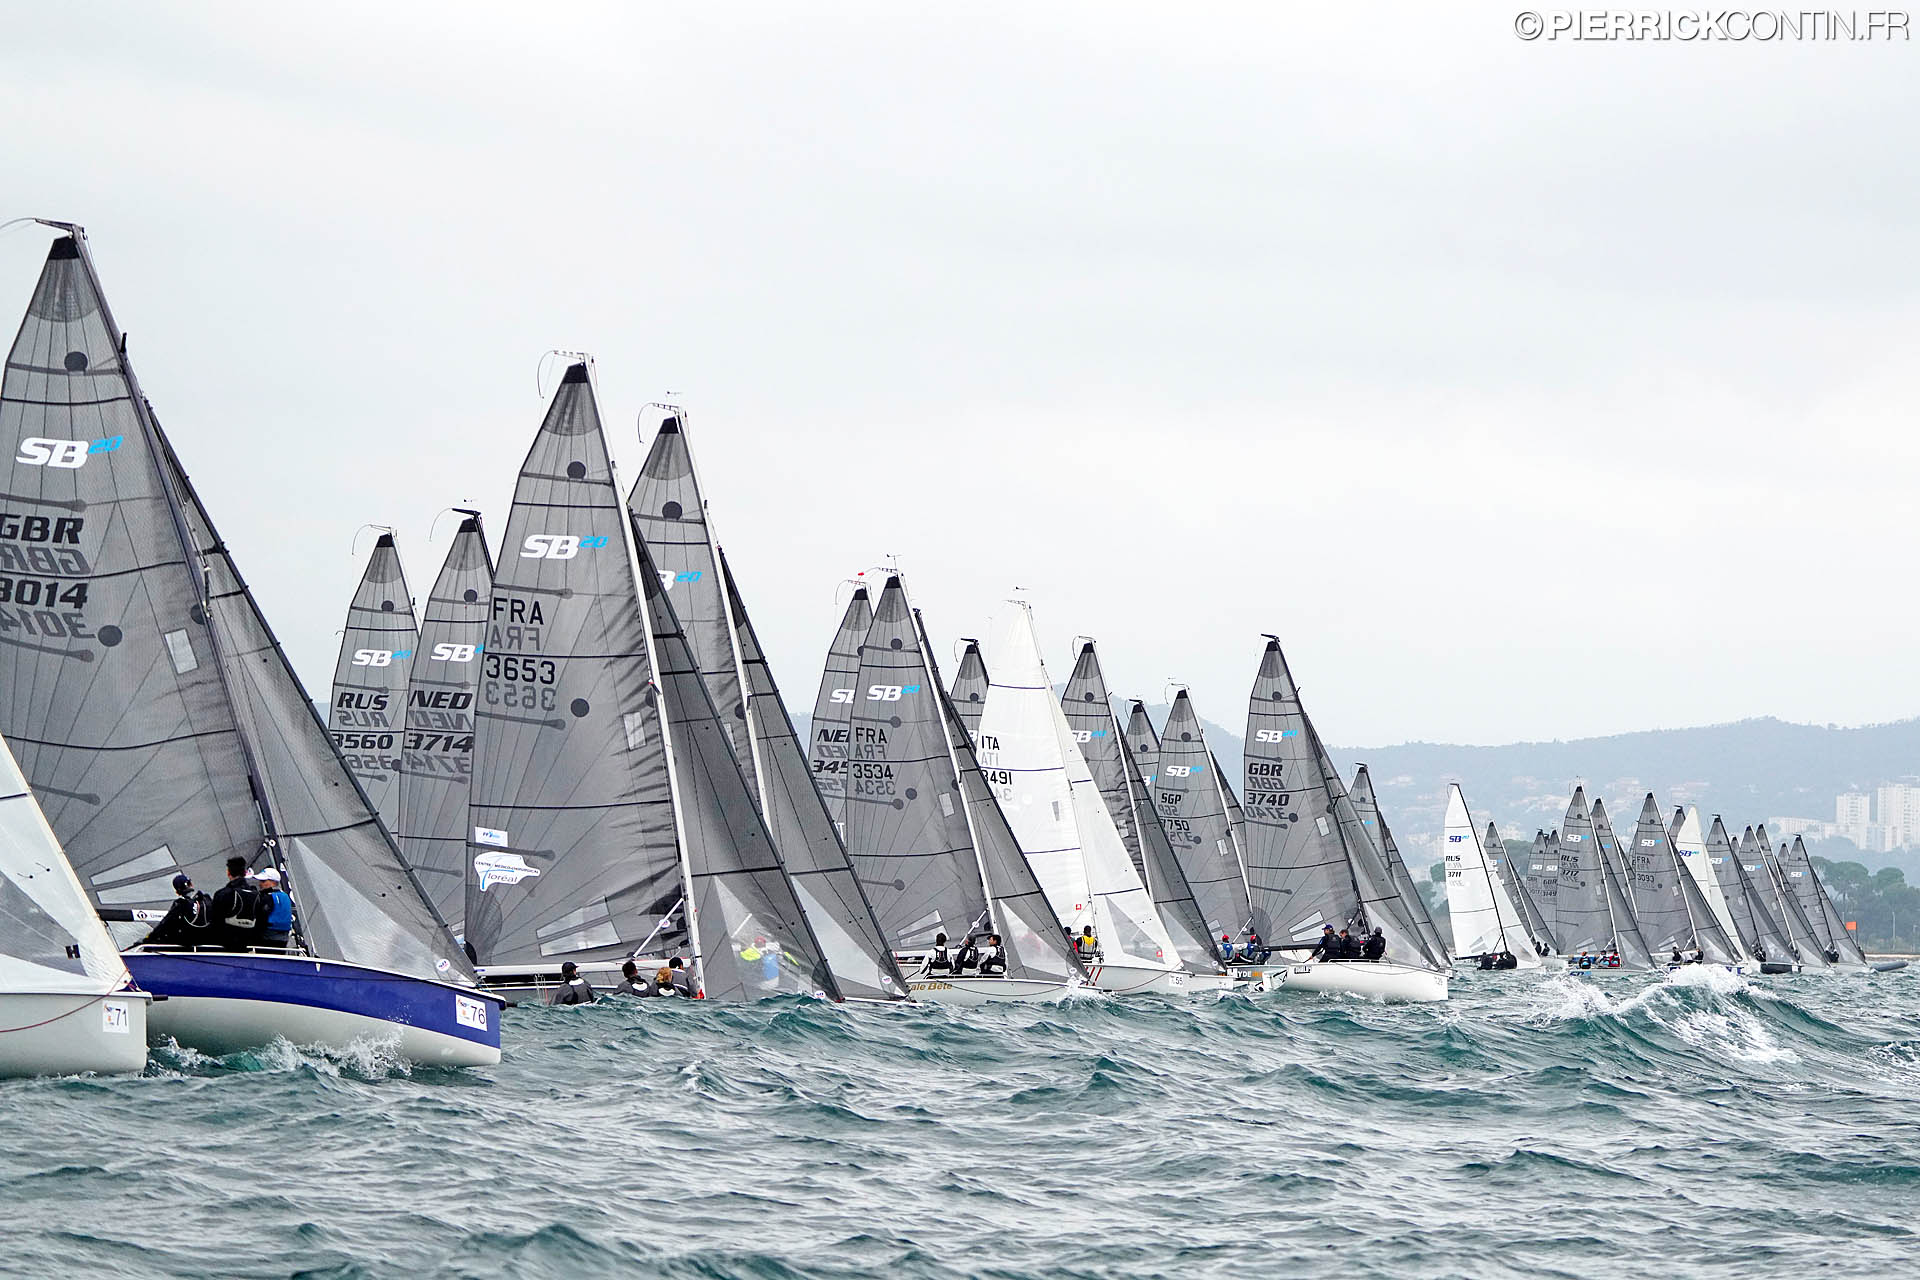  SB20  World Championship 2019  Hyeres FRA  Day 2, only one race in fresh wind, no change on top